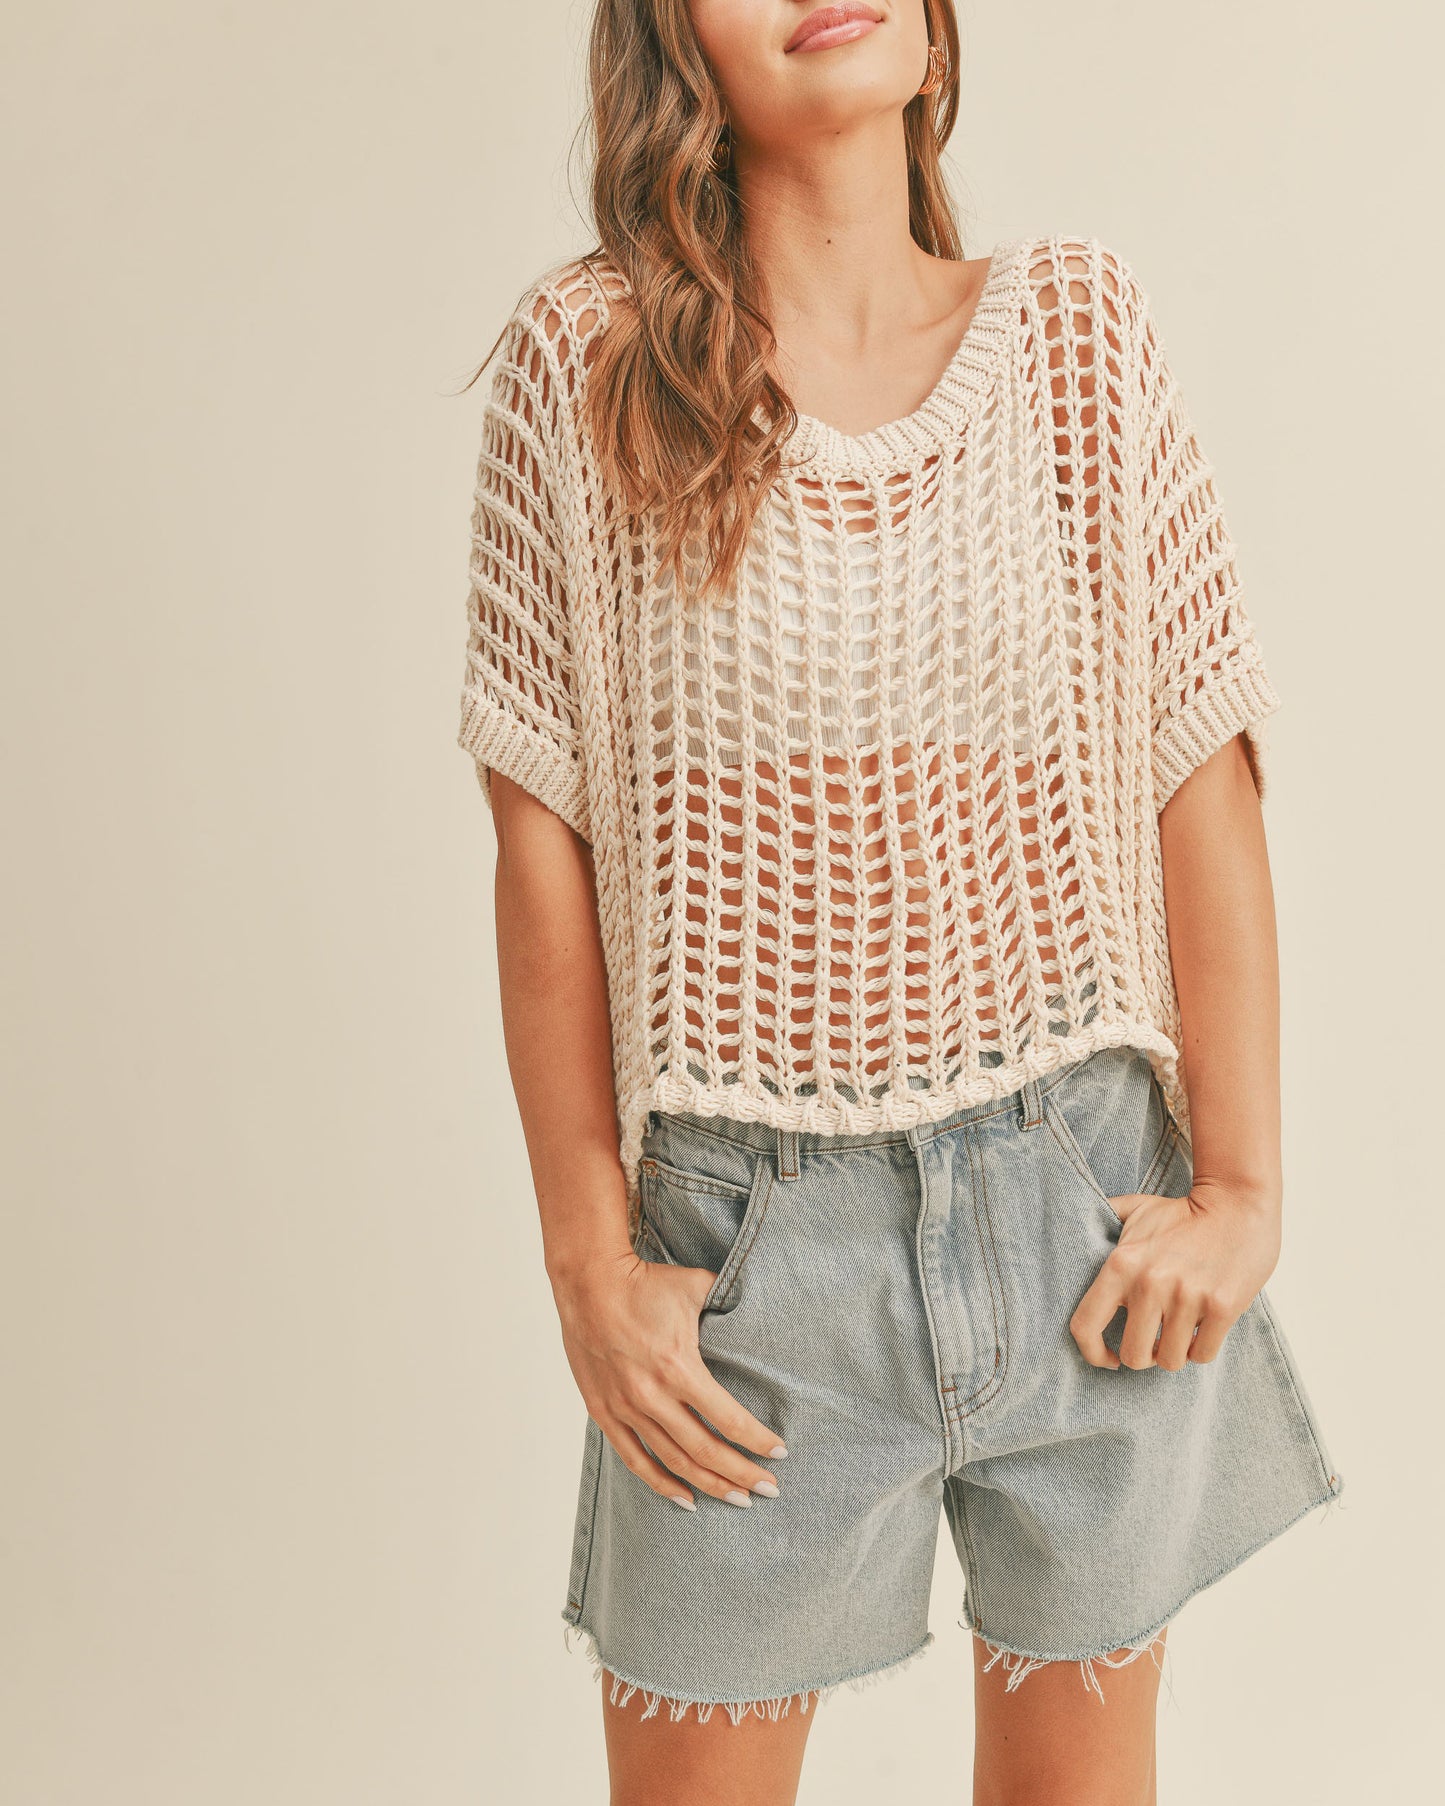 Lucy Net Patterned Knit Top